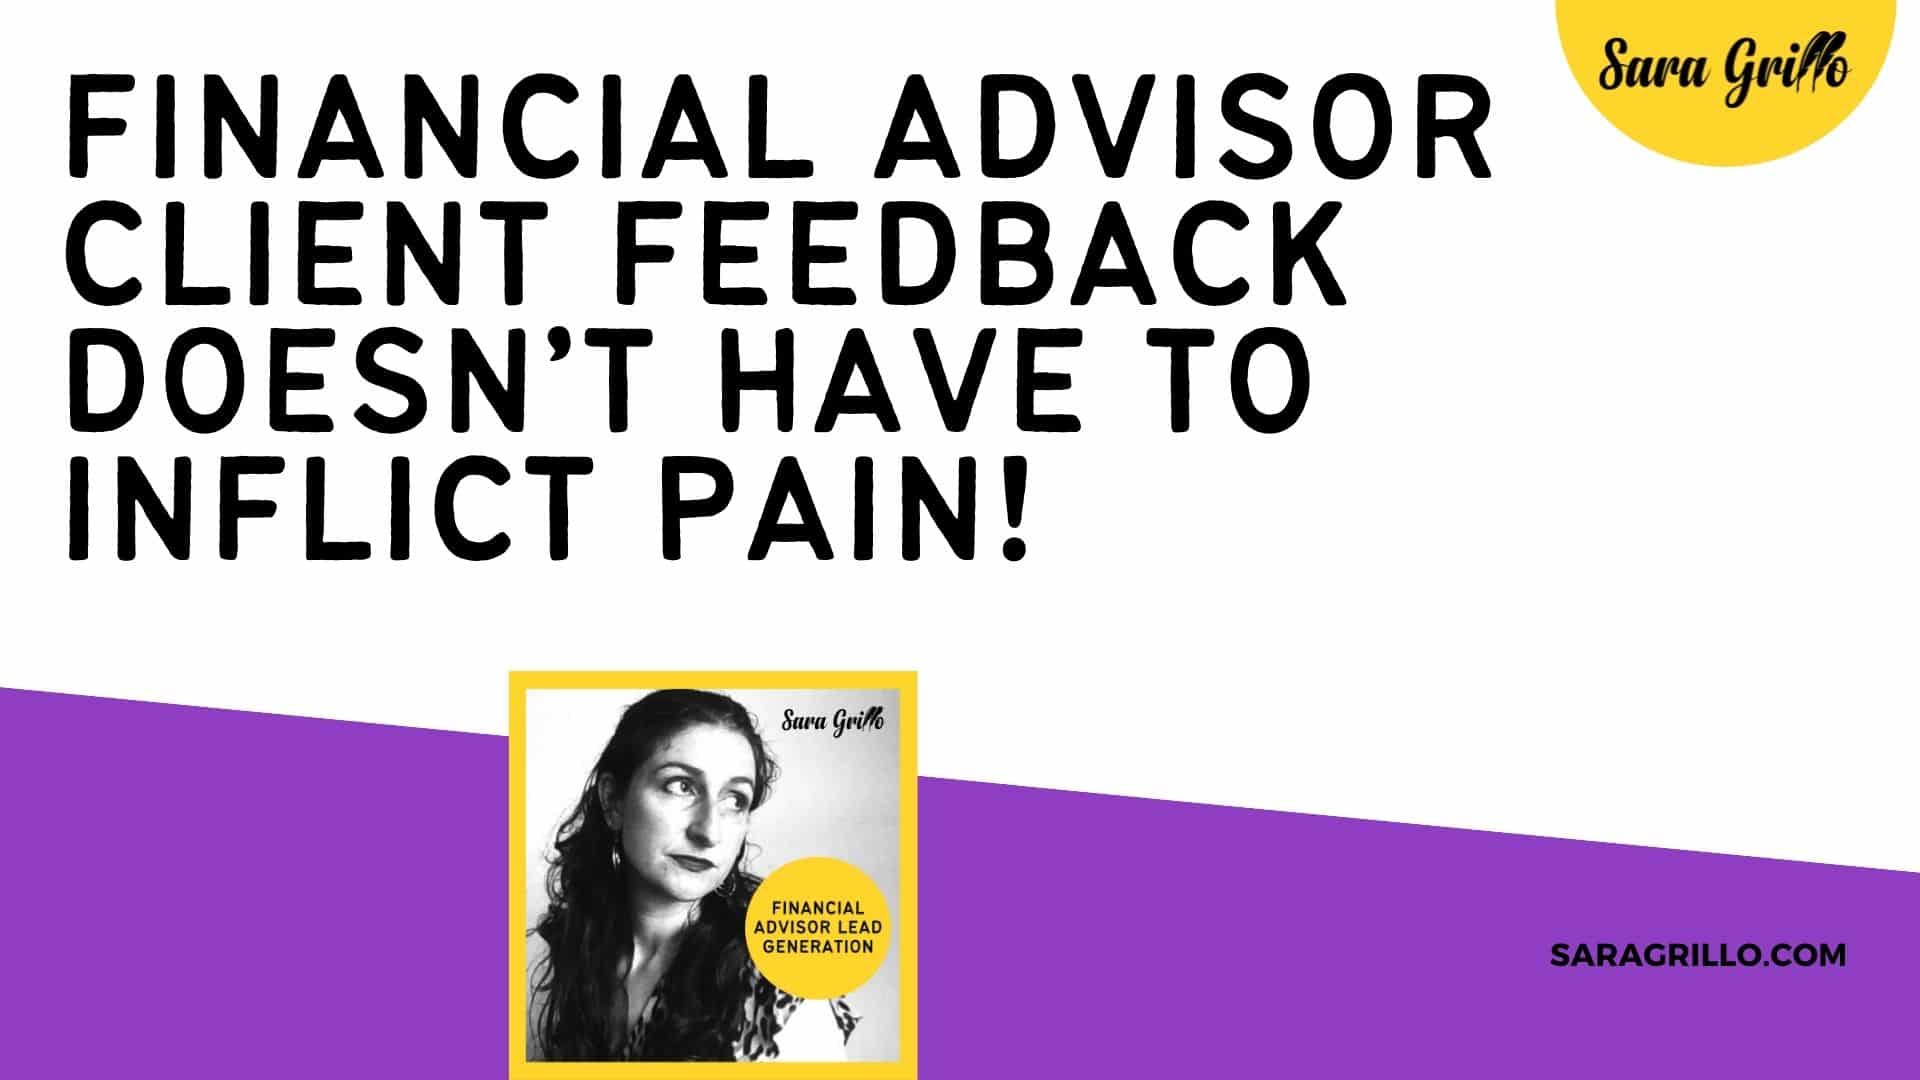 The process for asking for financial advisor client feedback doesn't have to inflict pain!